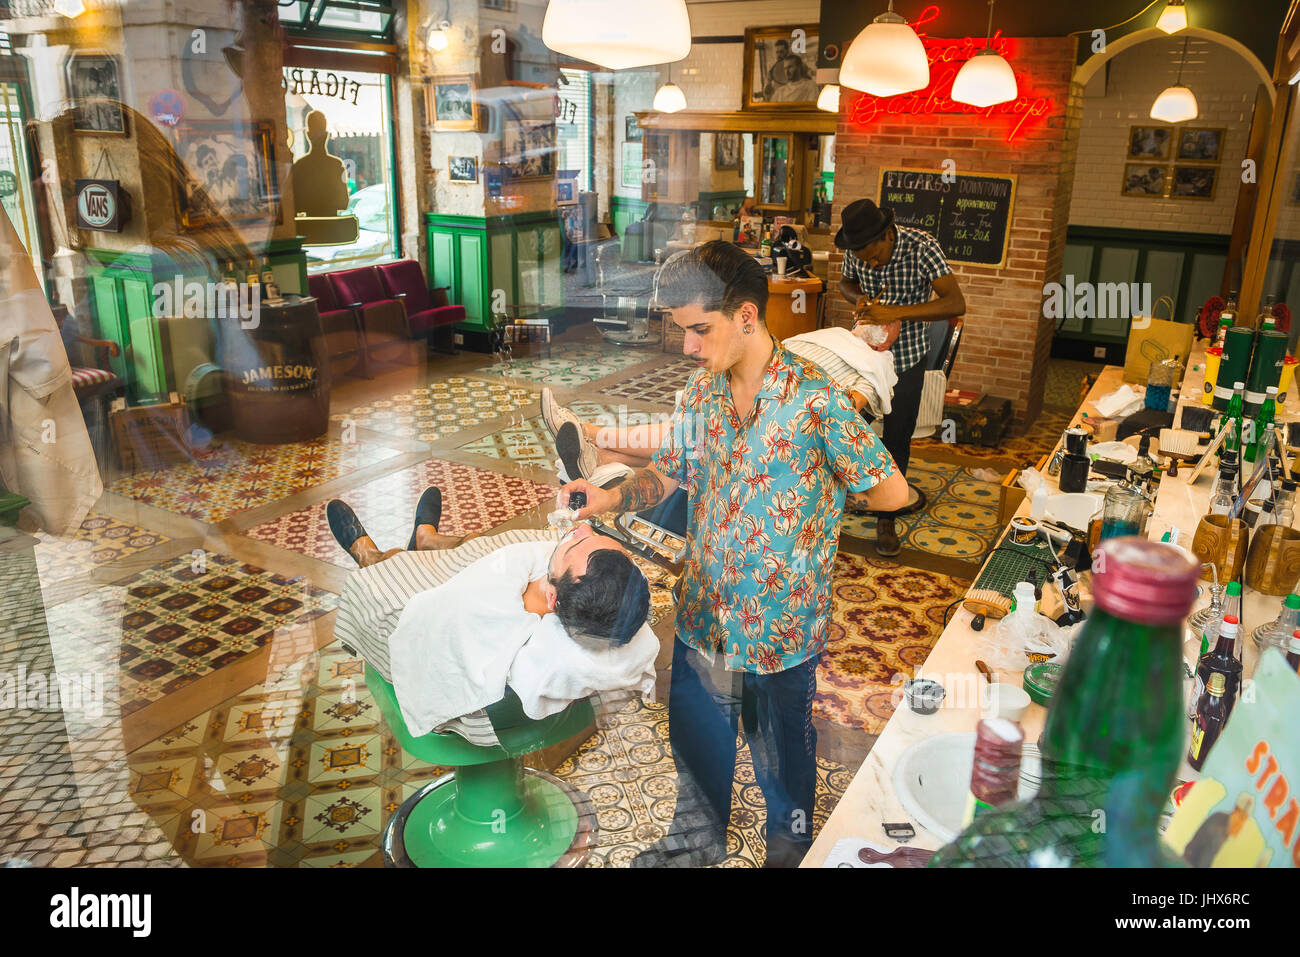 Barber shop, view through plate glass window of men being shaved in Figaro's traditional barber shop in the Baixa district of Lisbon, Portugal. Stock Photo